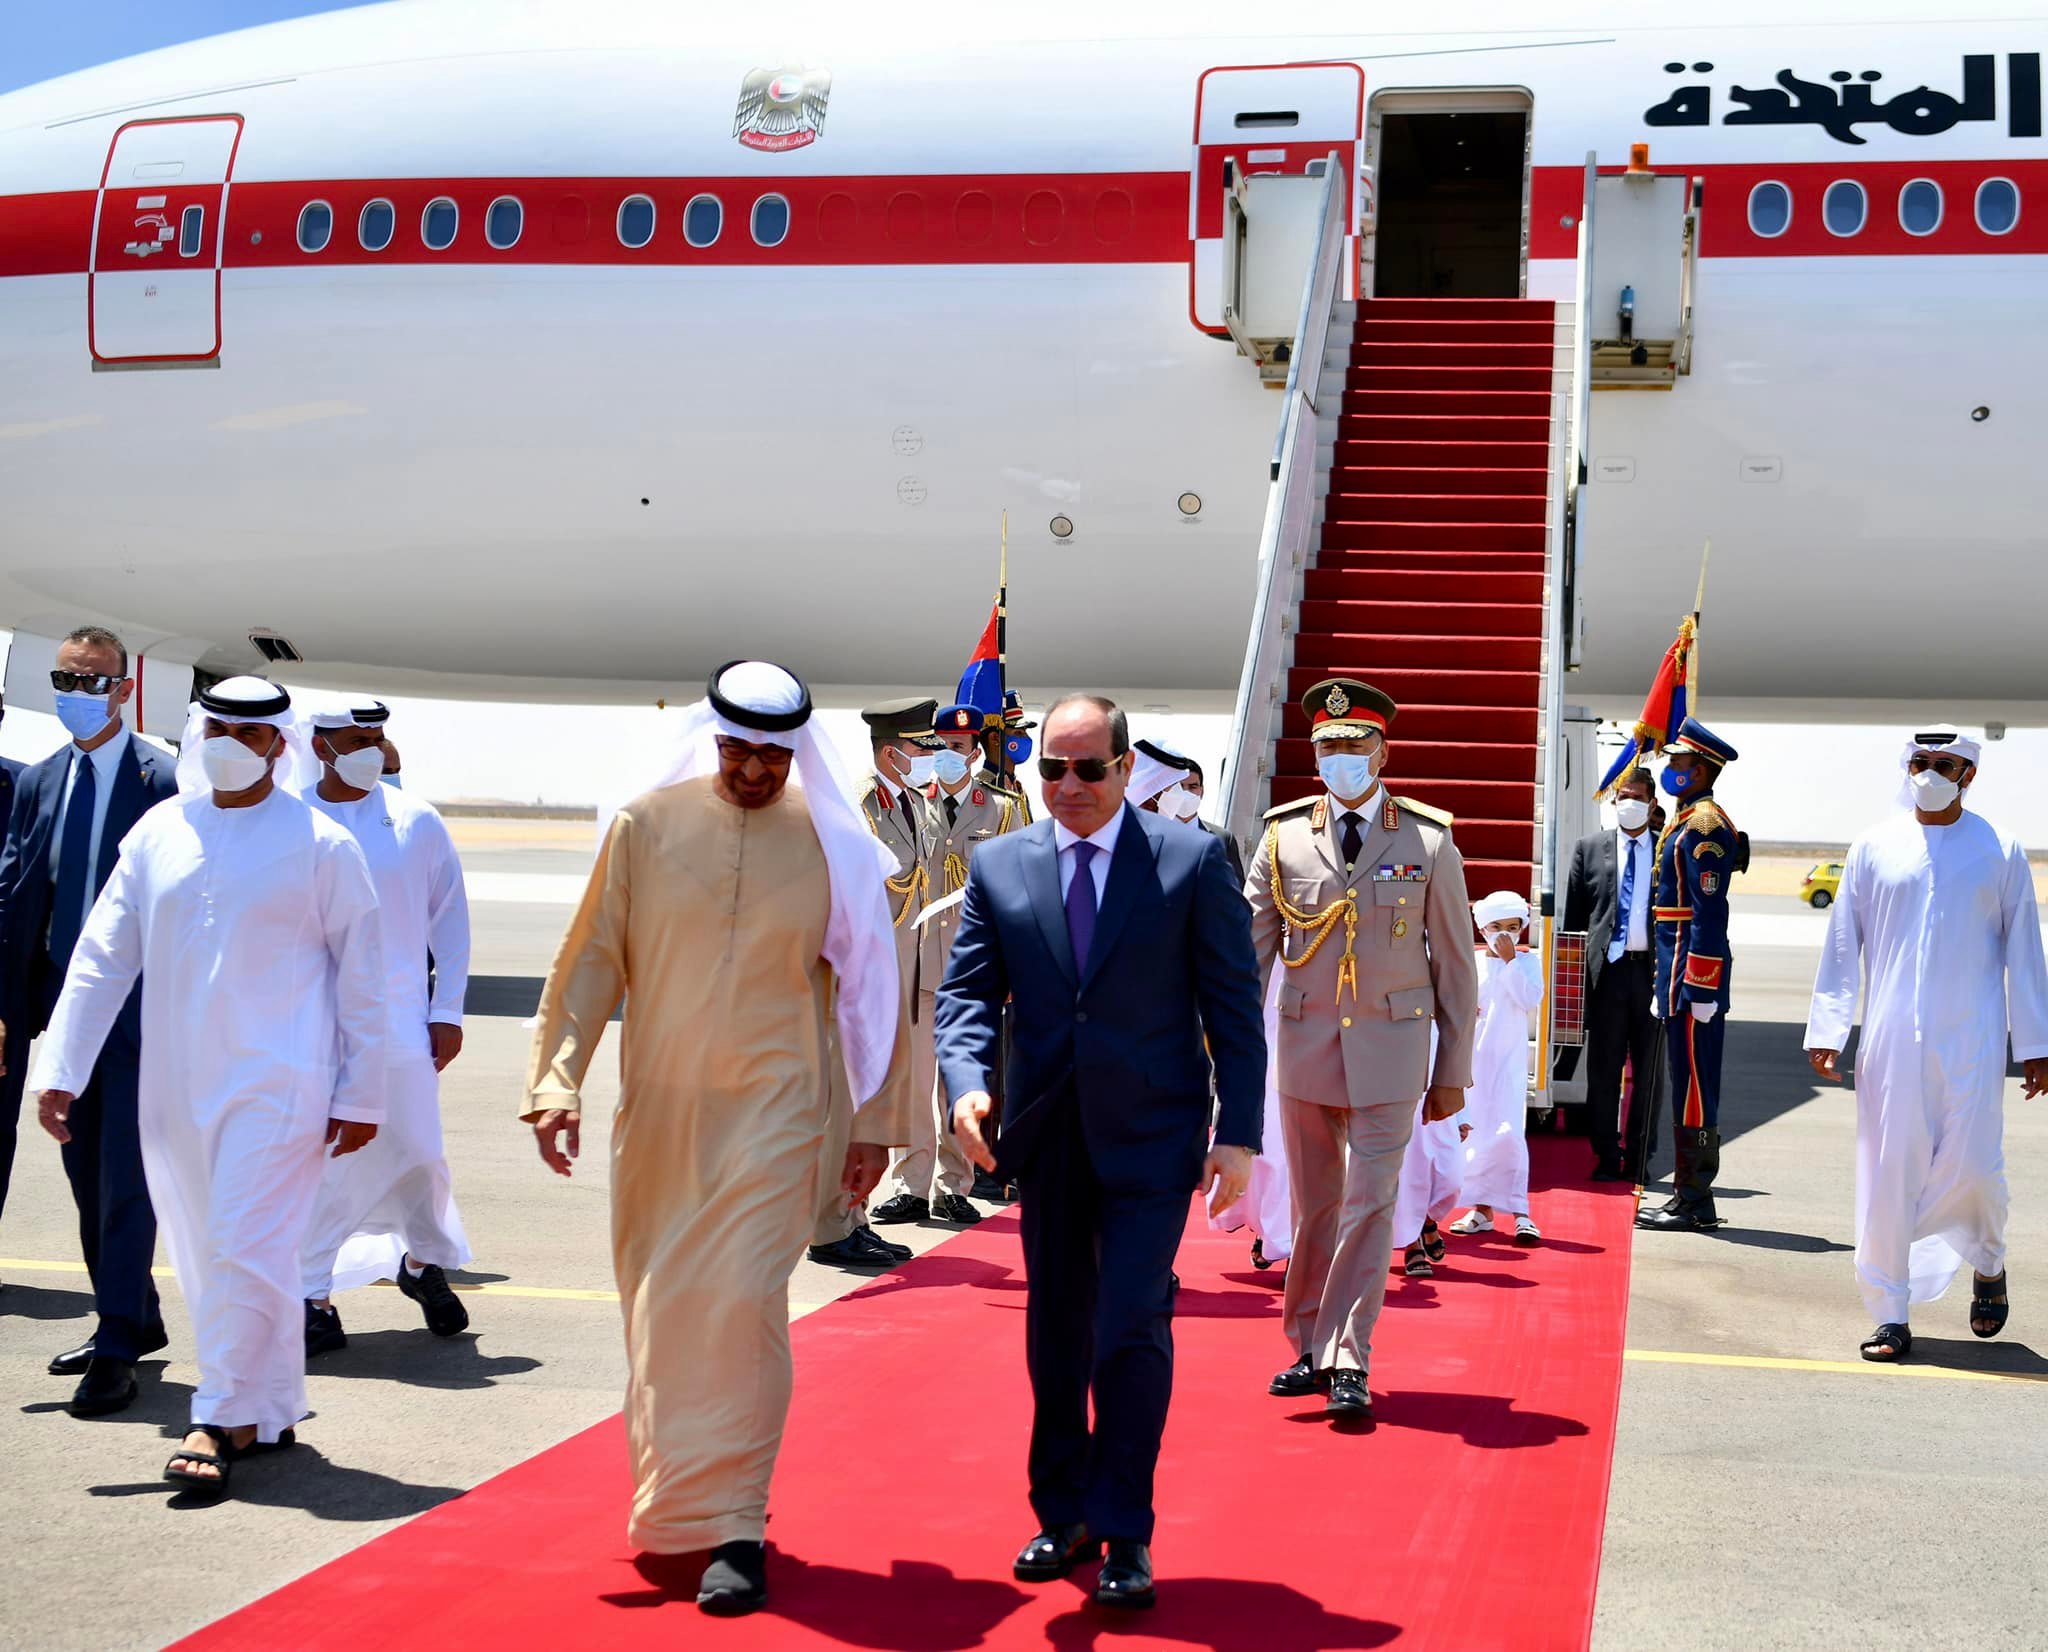 President Sisi receives Sheikh Mohamed bin Zayed Al Nahyan at El Alamein Airport